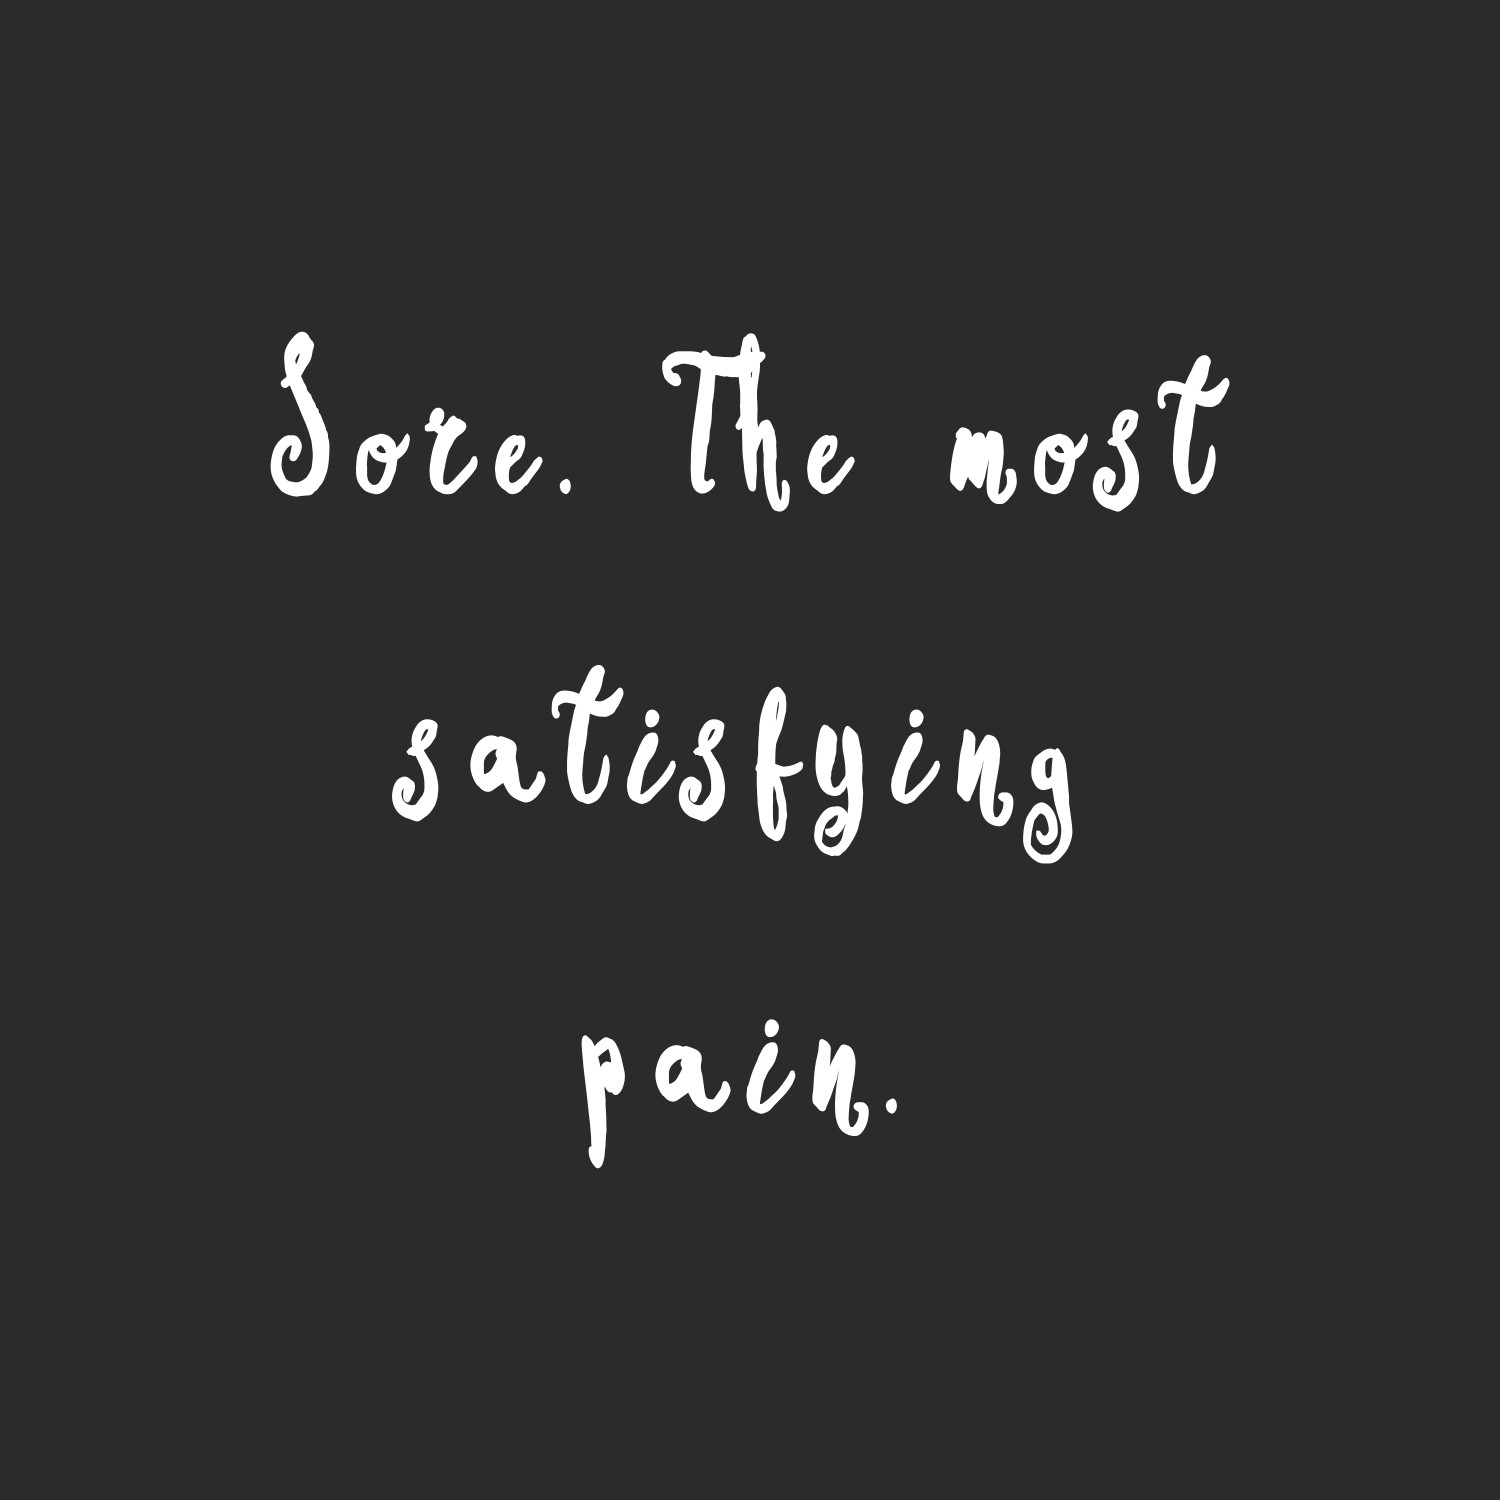 The most satisfying pain! Browse our collection of exercise and healthy eating motivational quotes and get instant fitness and weight loss inspiration. Transform positive thoughts into positive actions and get fit, healthy and happy! https://www.spotebi.com/workout-motivation/the-most-satisfying-pain/